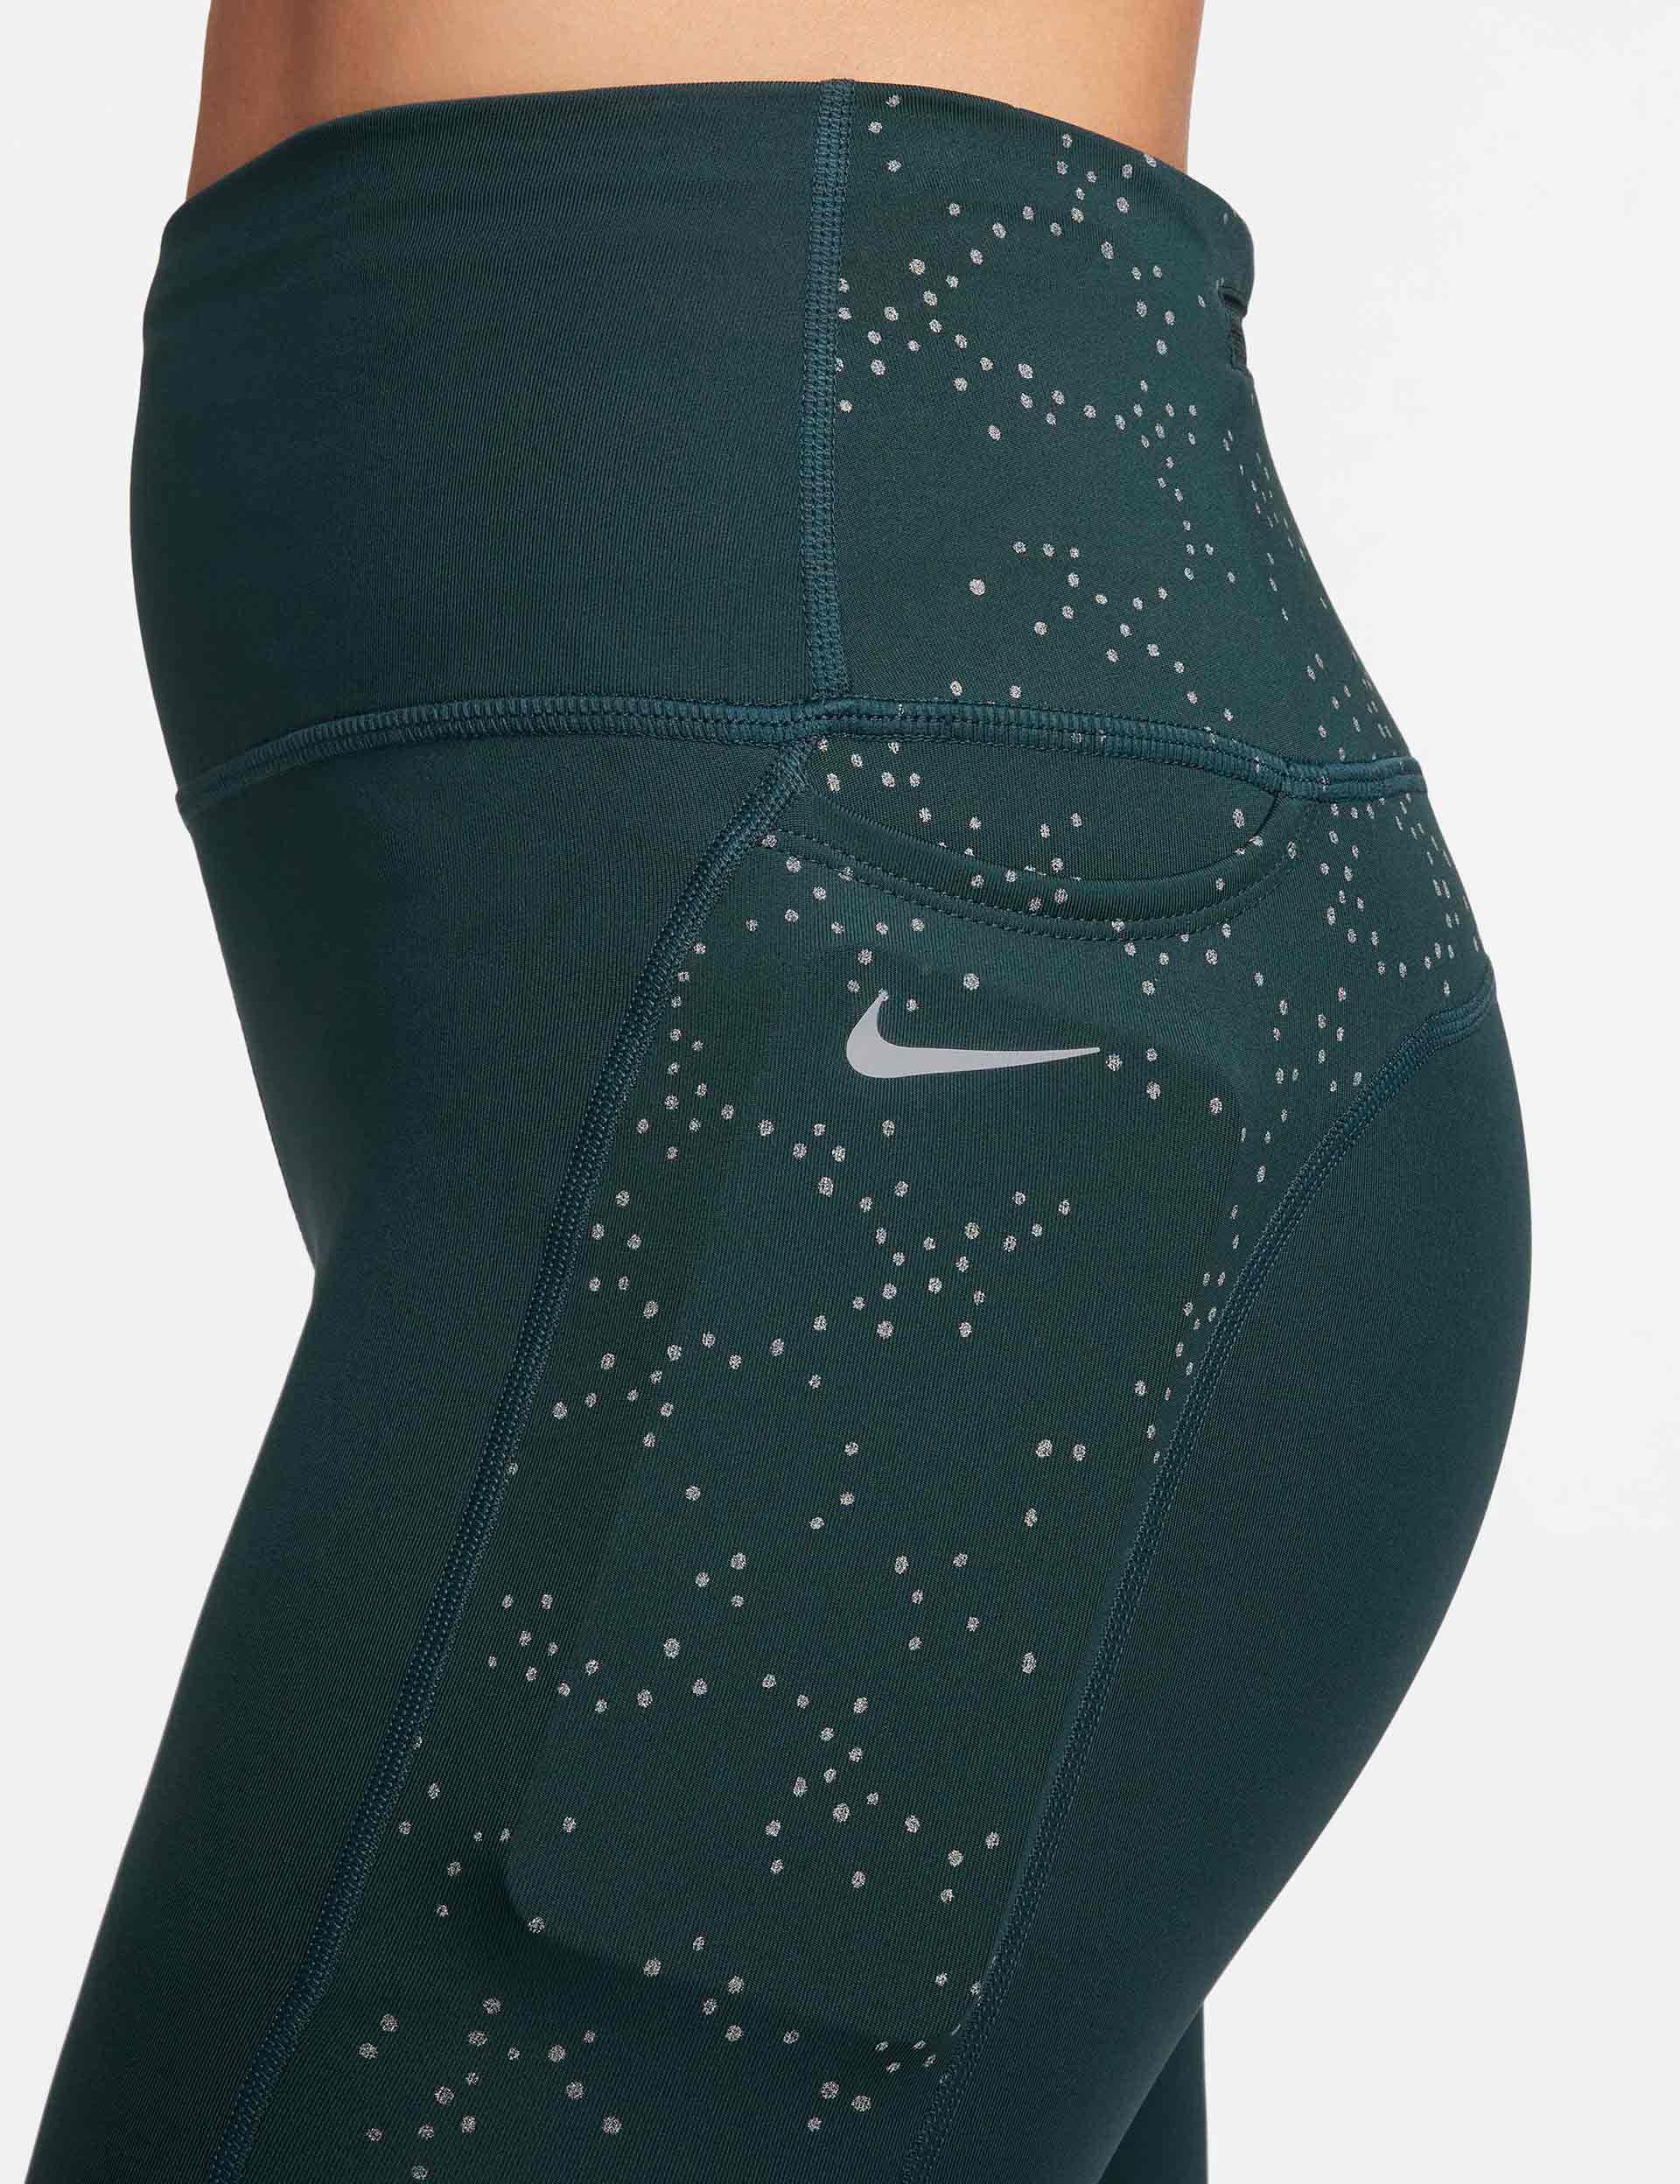 SMALL Nike Women's Running Cropped Tights Mid Rise 7/8 Length